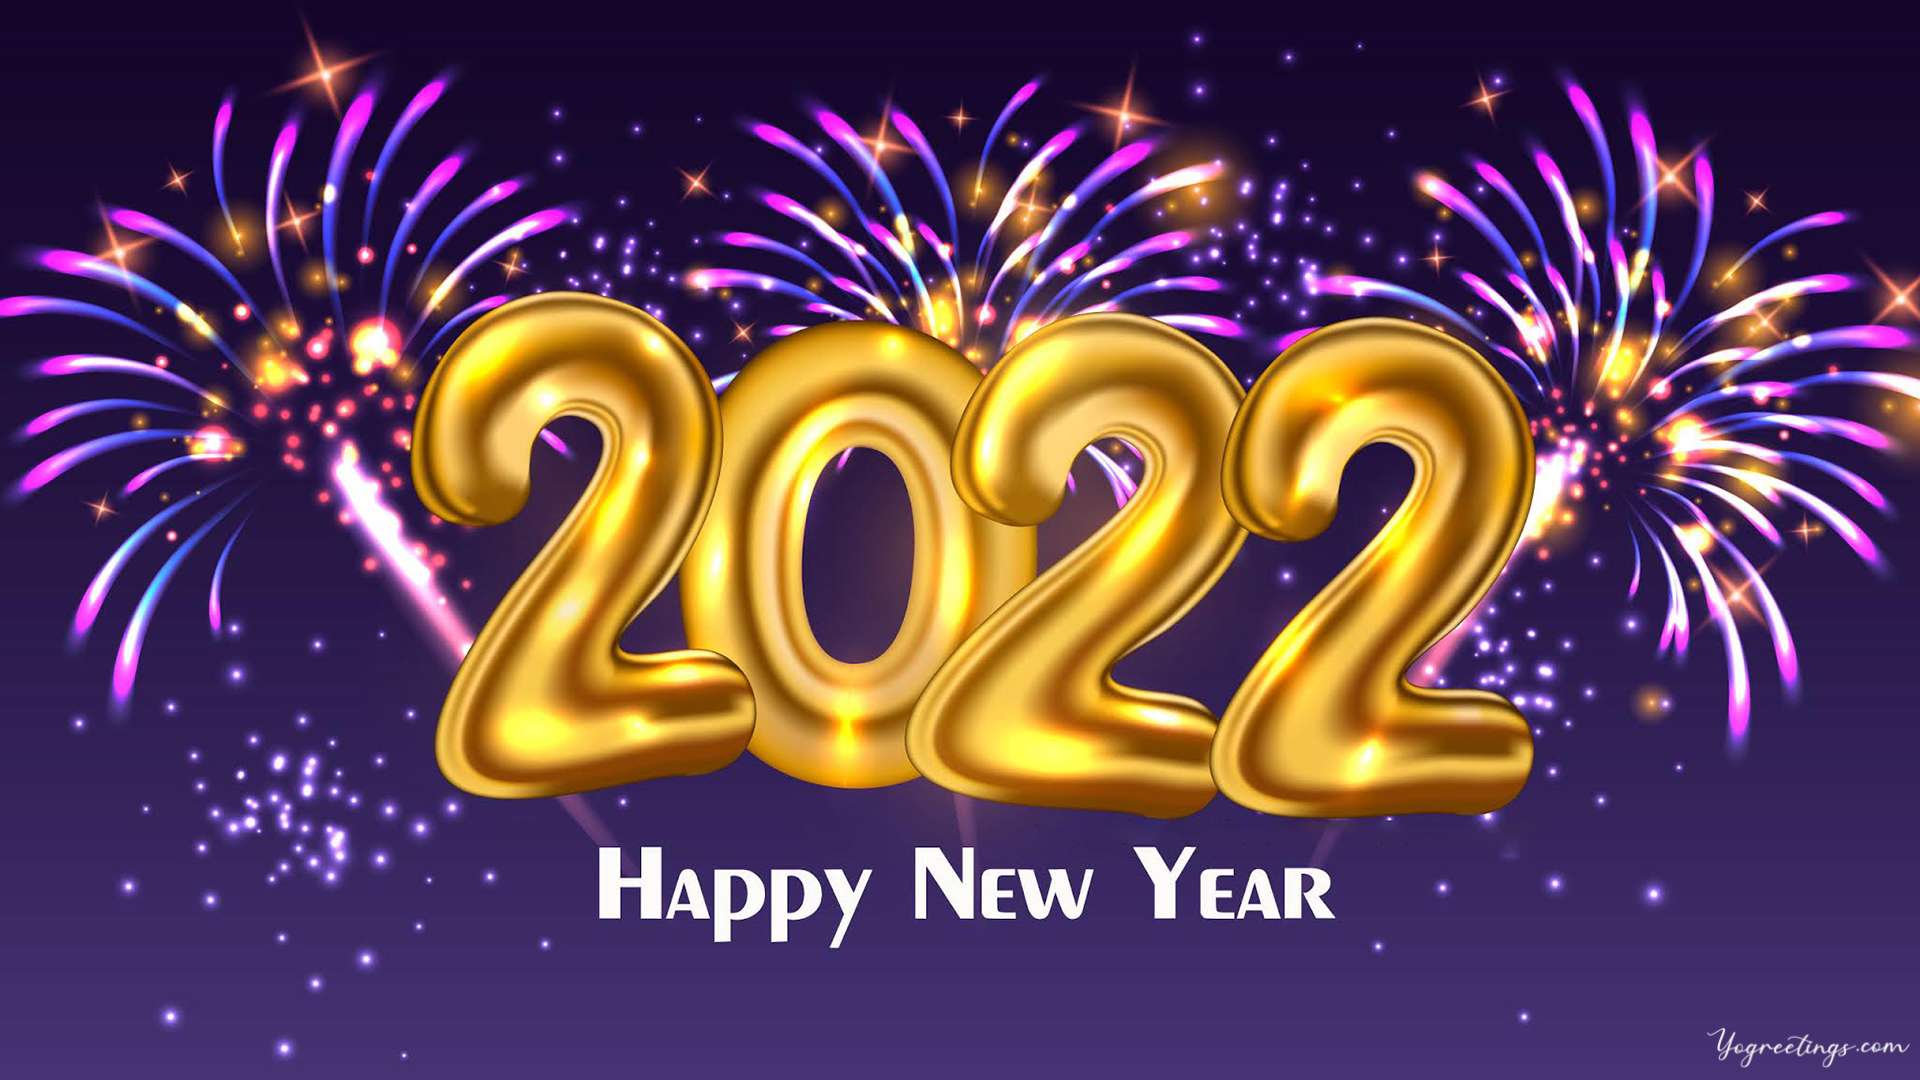 Happy New Year 2022 hd wallpaper & images download